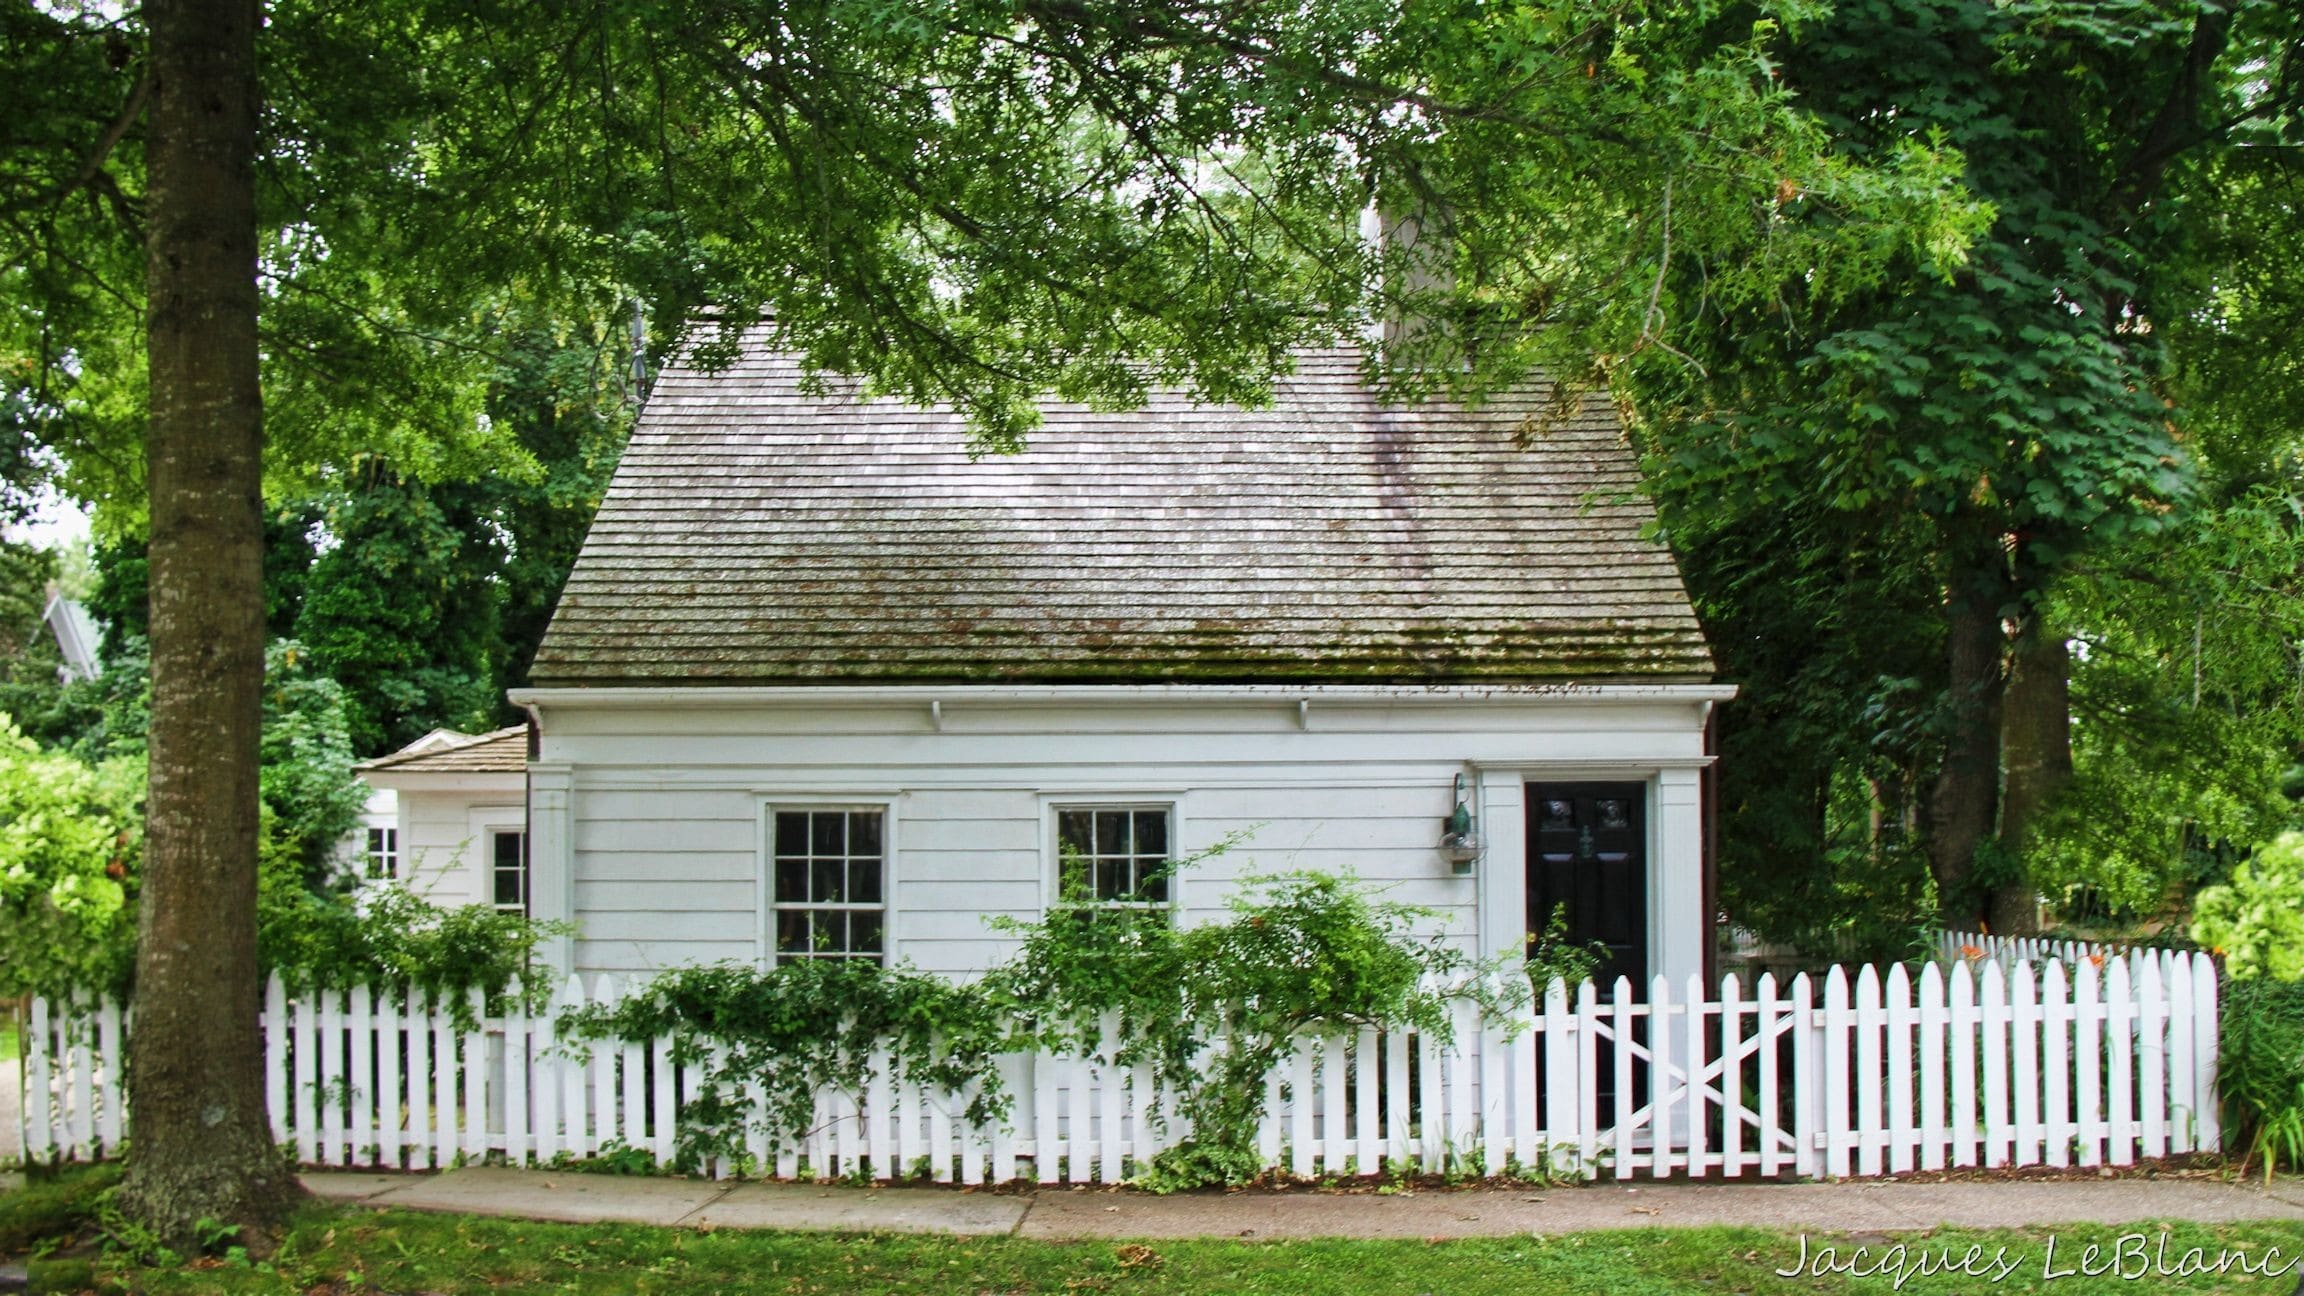 The oldest home in Sag Harbor, originally an important whaling seaport, located on Long Island's East End. 